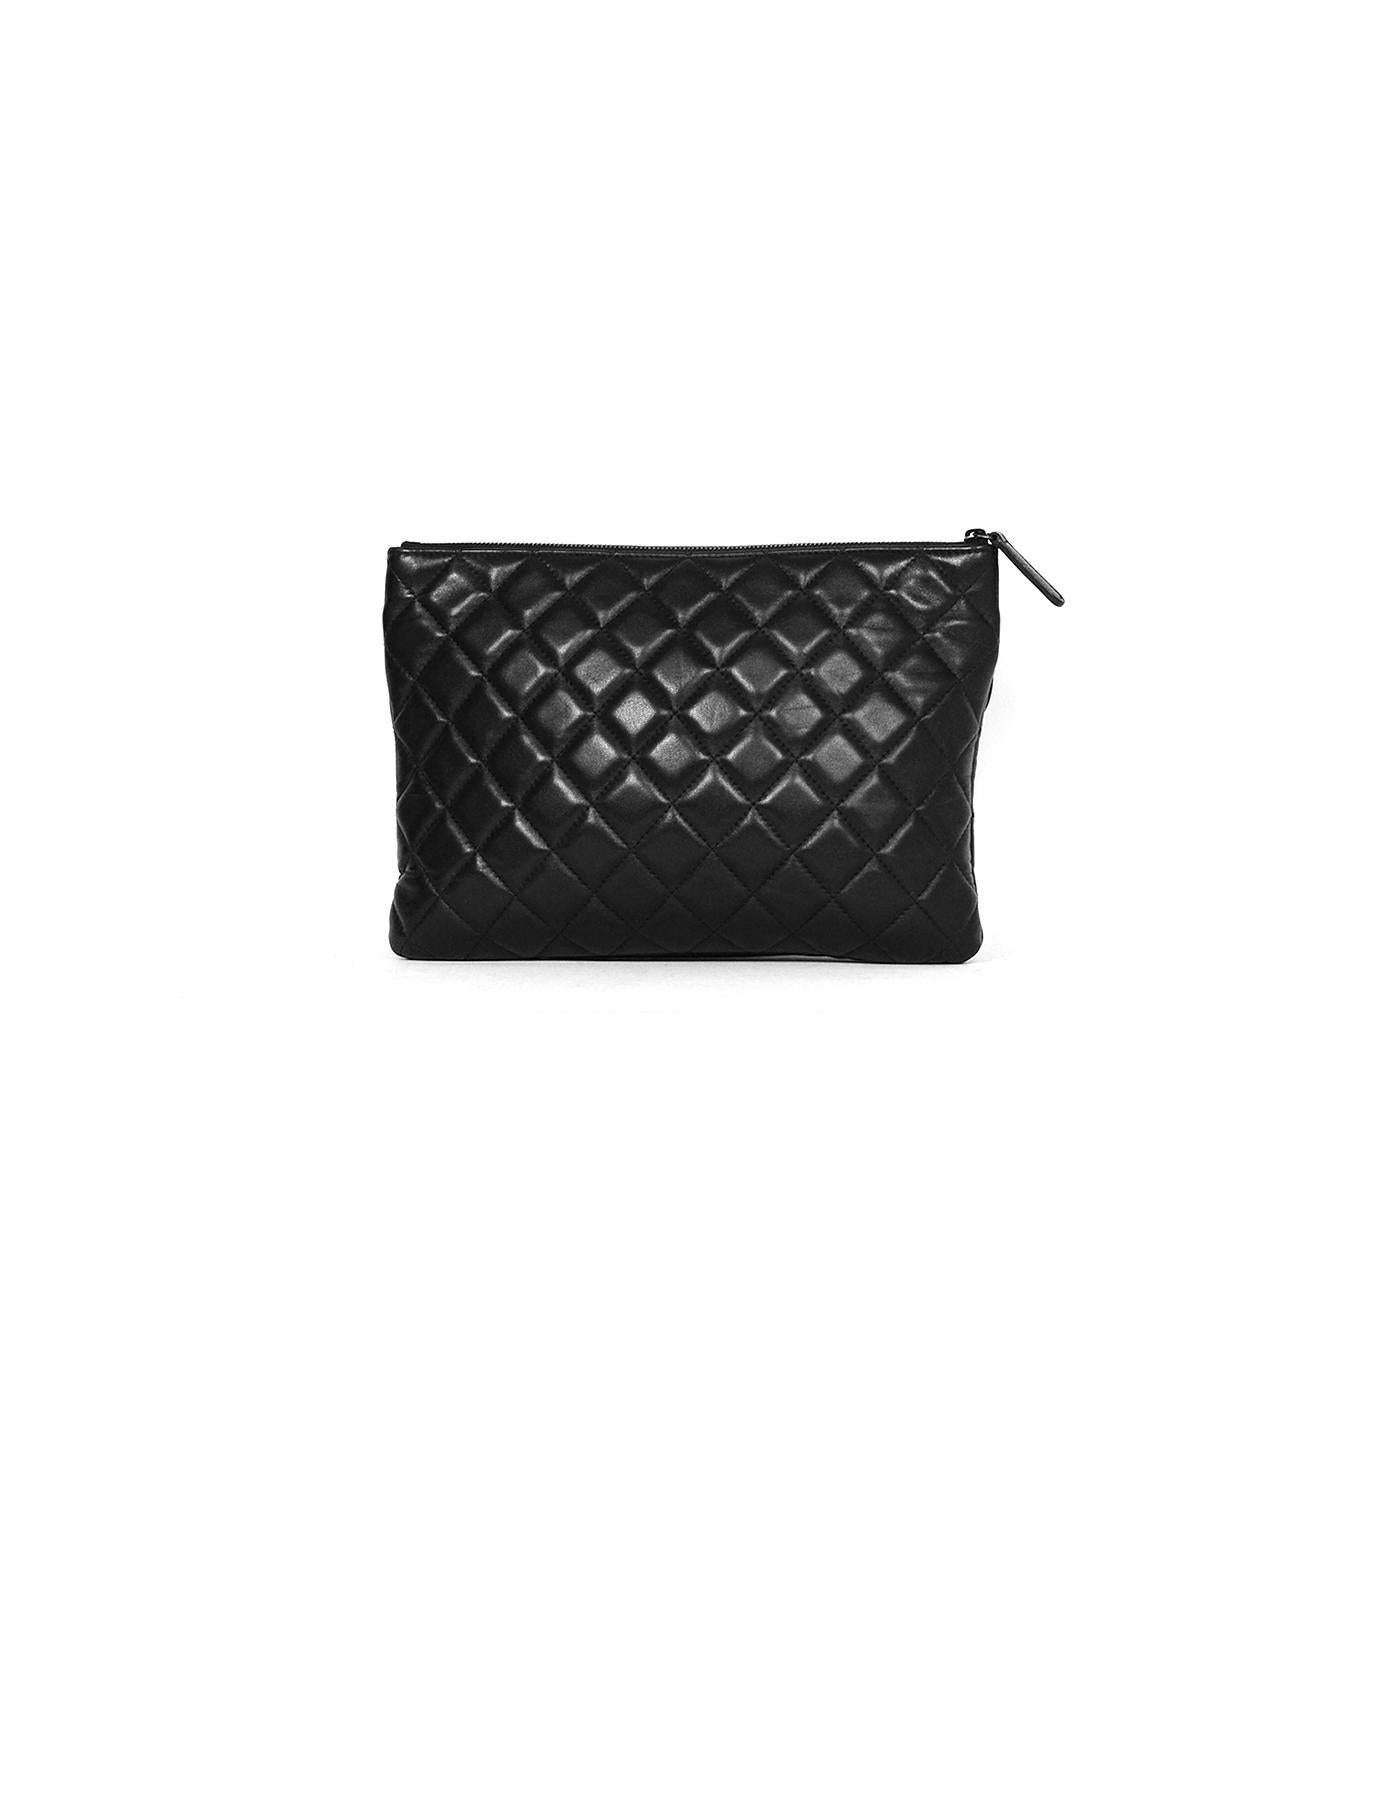 Chanel SO Black Lambskin Quilted Pouch/Clutch Bag

Made In: Italy
Year of Production: 2018
Color: Black 
Hardware: Black
Materials: Lambskin leather
Lining: Black grosgrain
Closure/Opening: Zip top and flap front compartment
Exterior Pockets: One